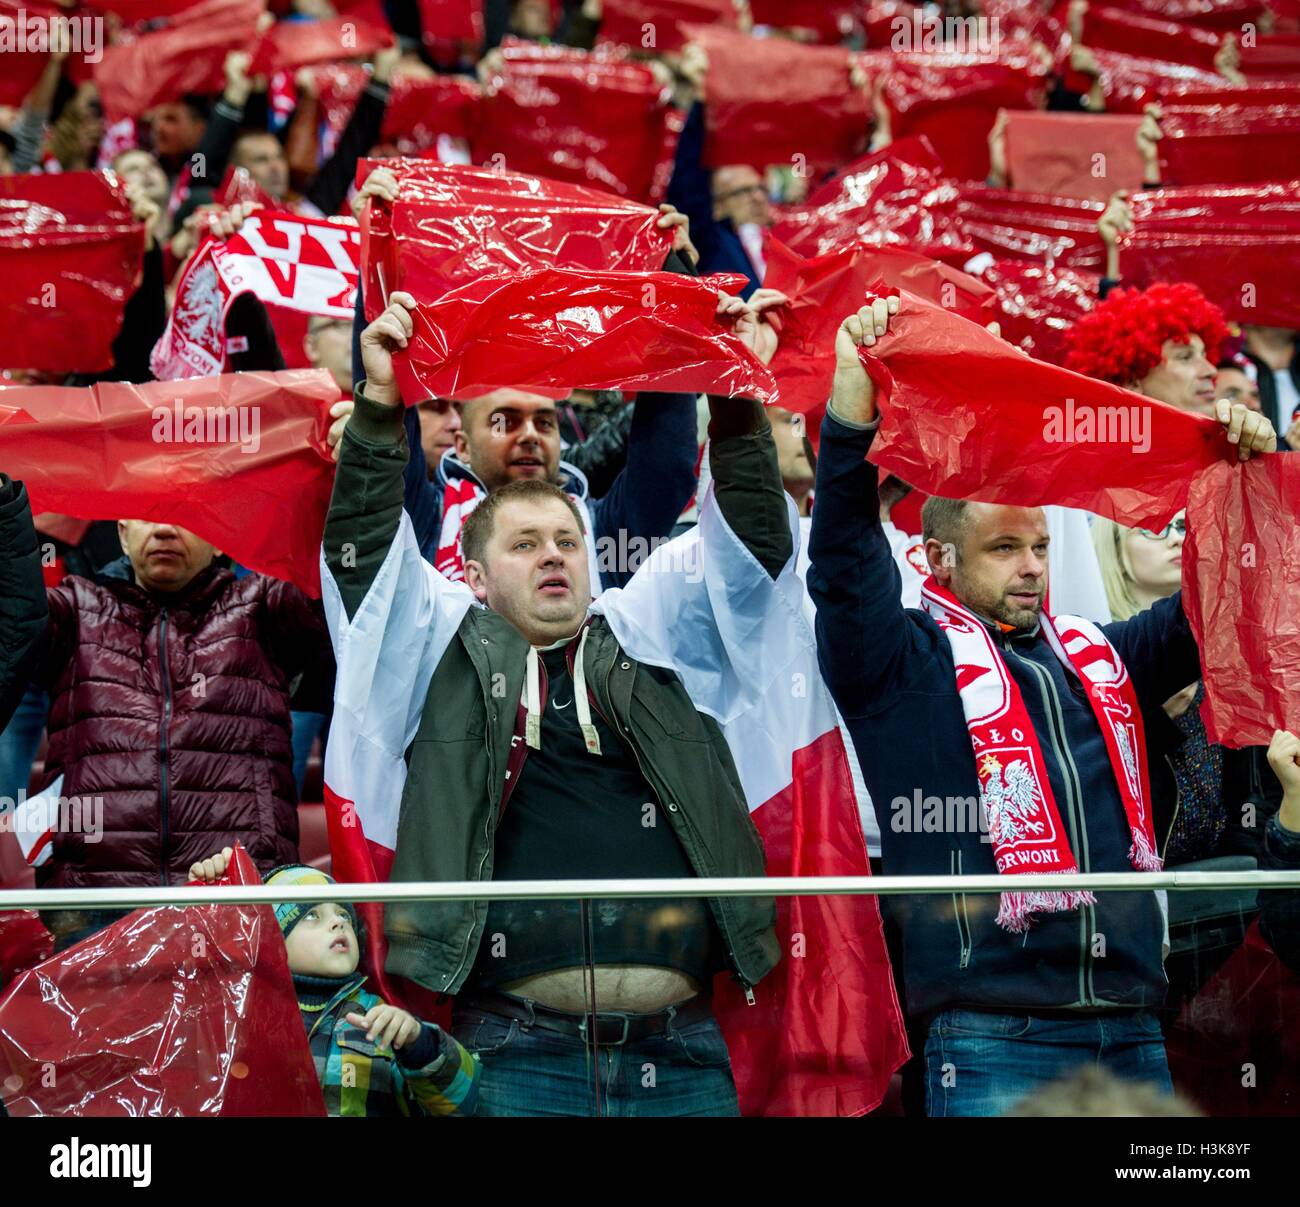 World  Cup  2018  Qualifiers - Poland vs Denmark on October 8, 2016 at the National Arena in Warsaw, Poland.  In the picture: spectators Stock Photo